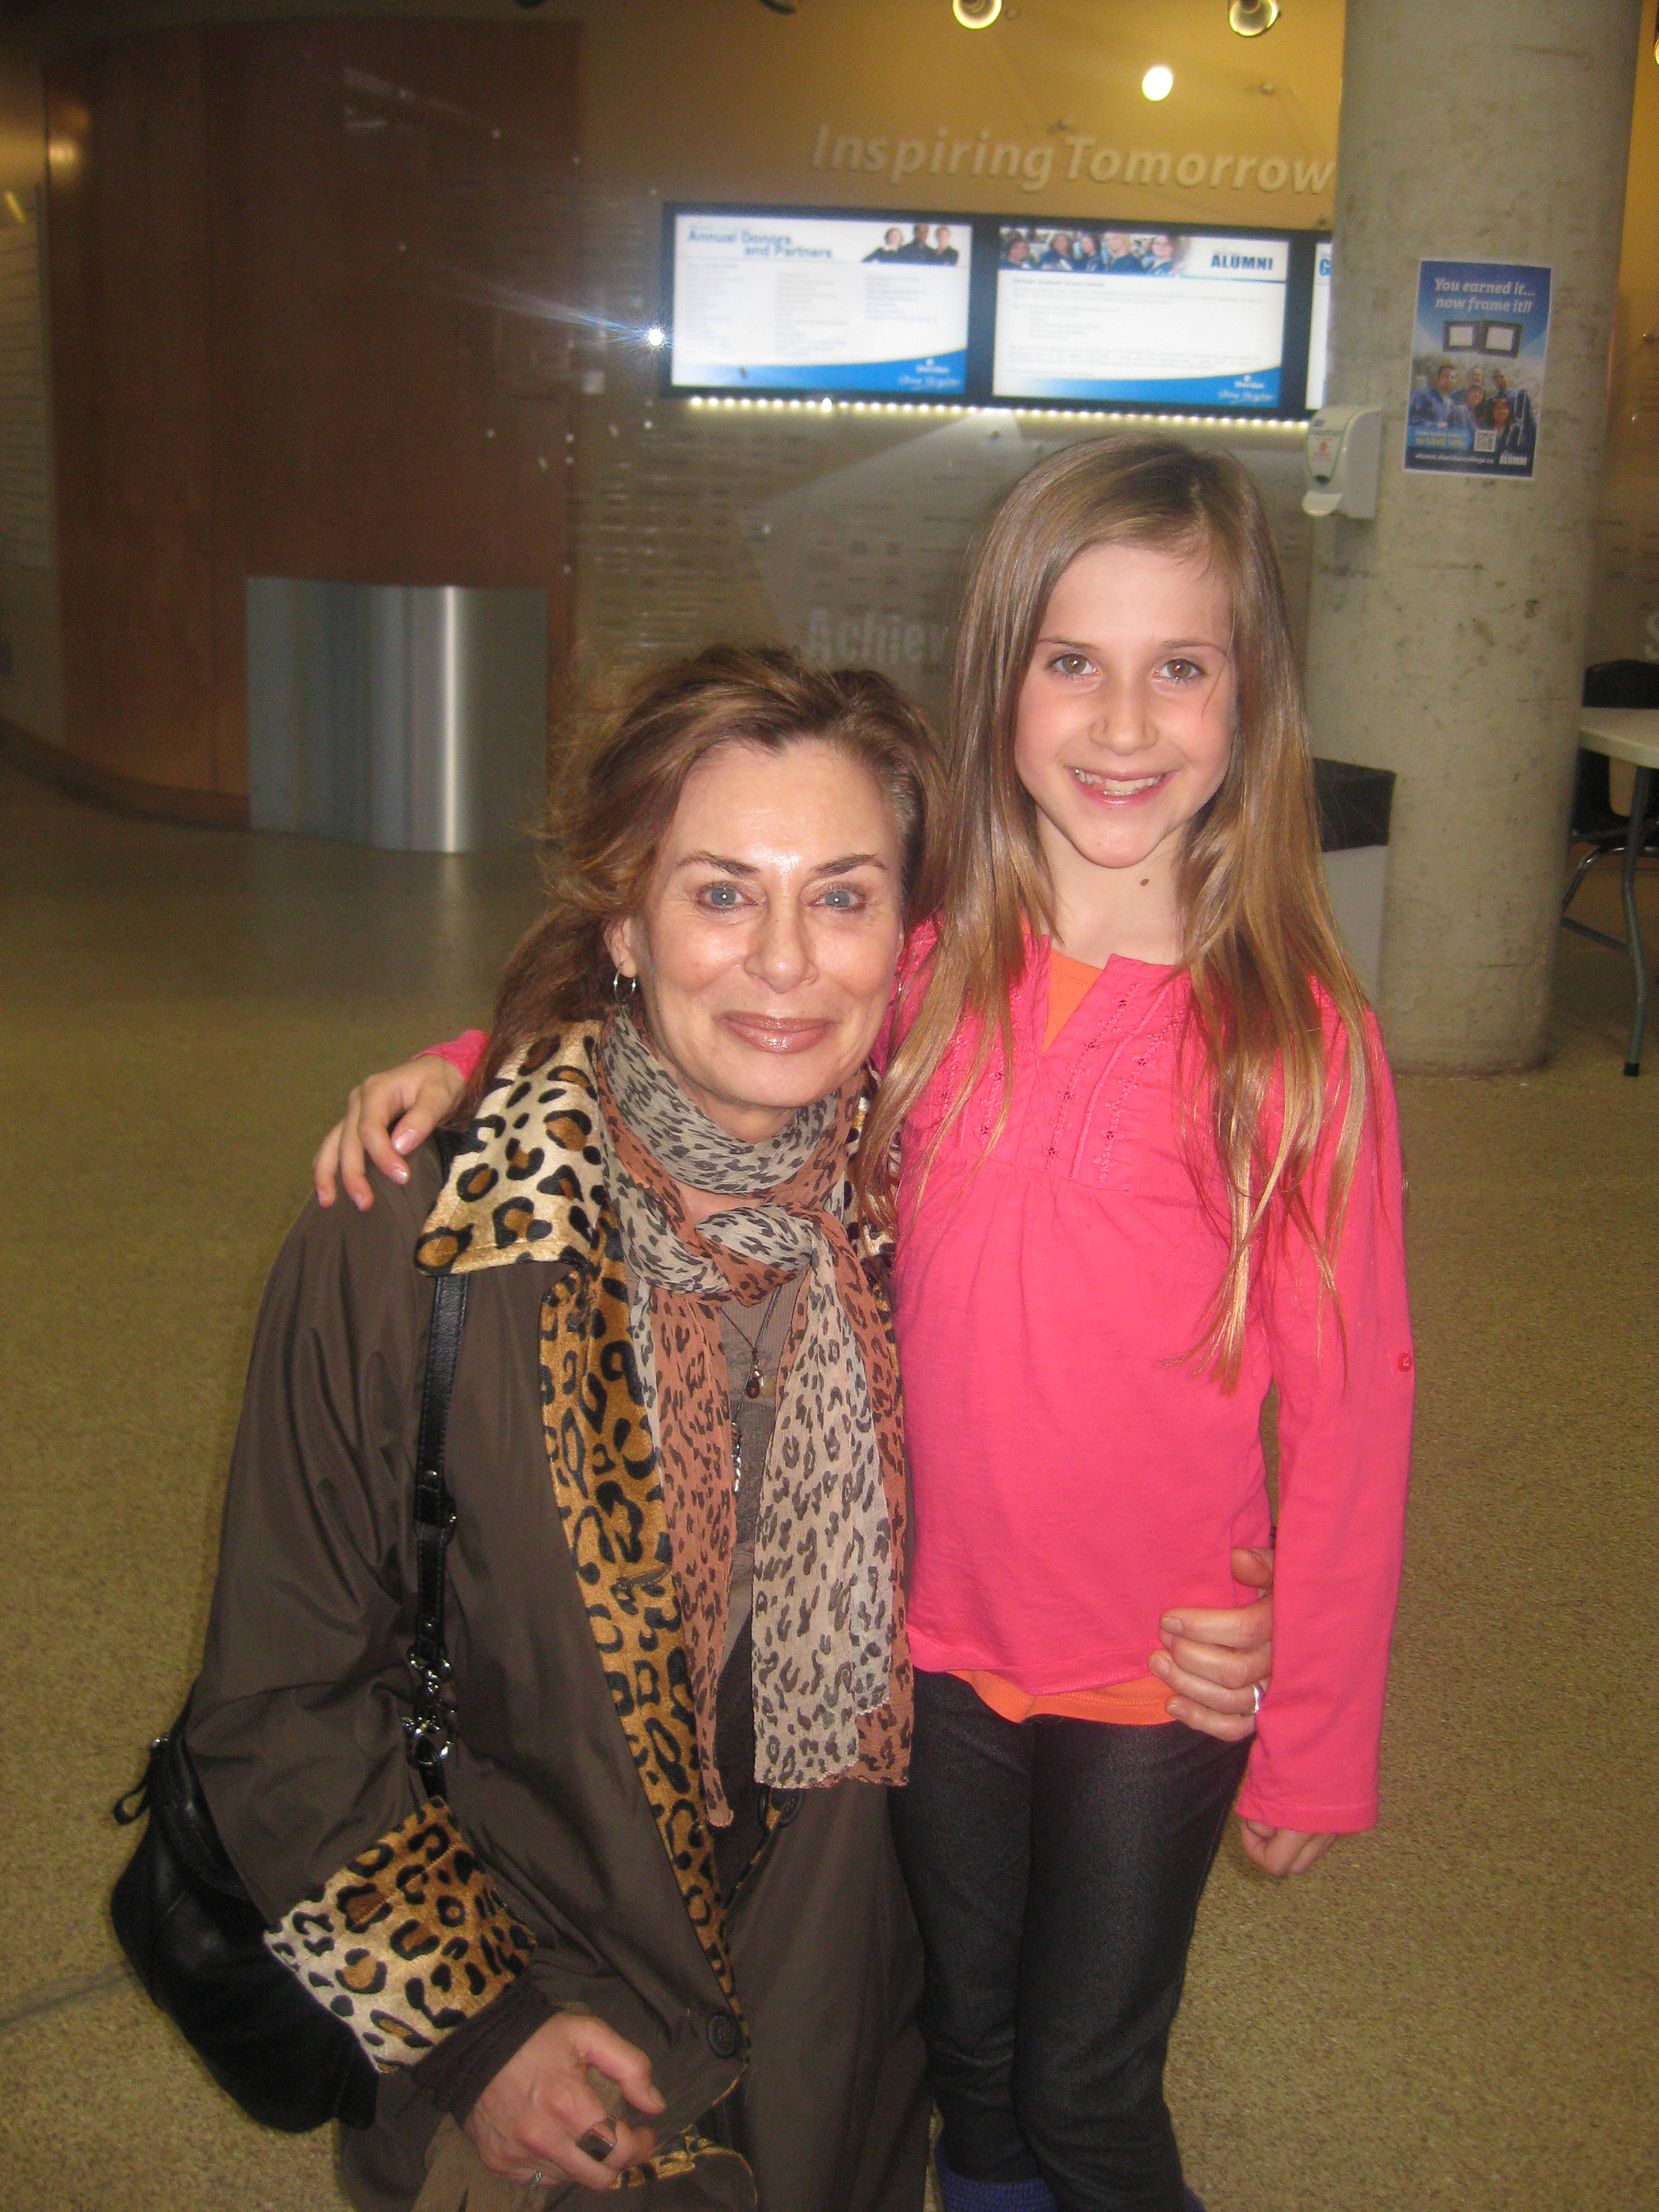 Gloria with legendary Canadian actor Mimi Kuzyk the daughter of Casting Director Kaliopi Kuzyk who cast Gloria in the Sheridan Film FOR EMMA TAYLOR.